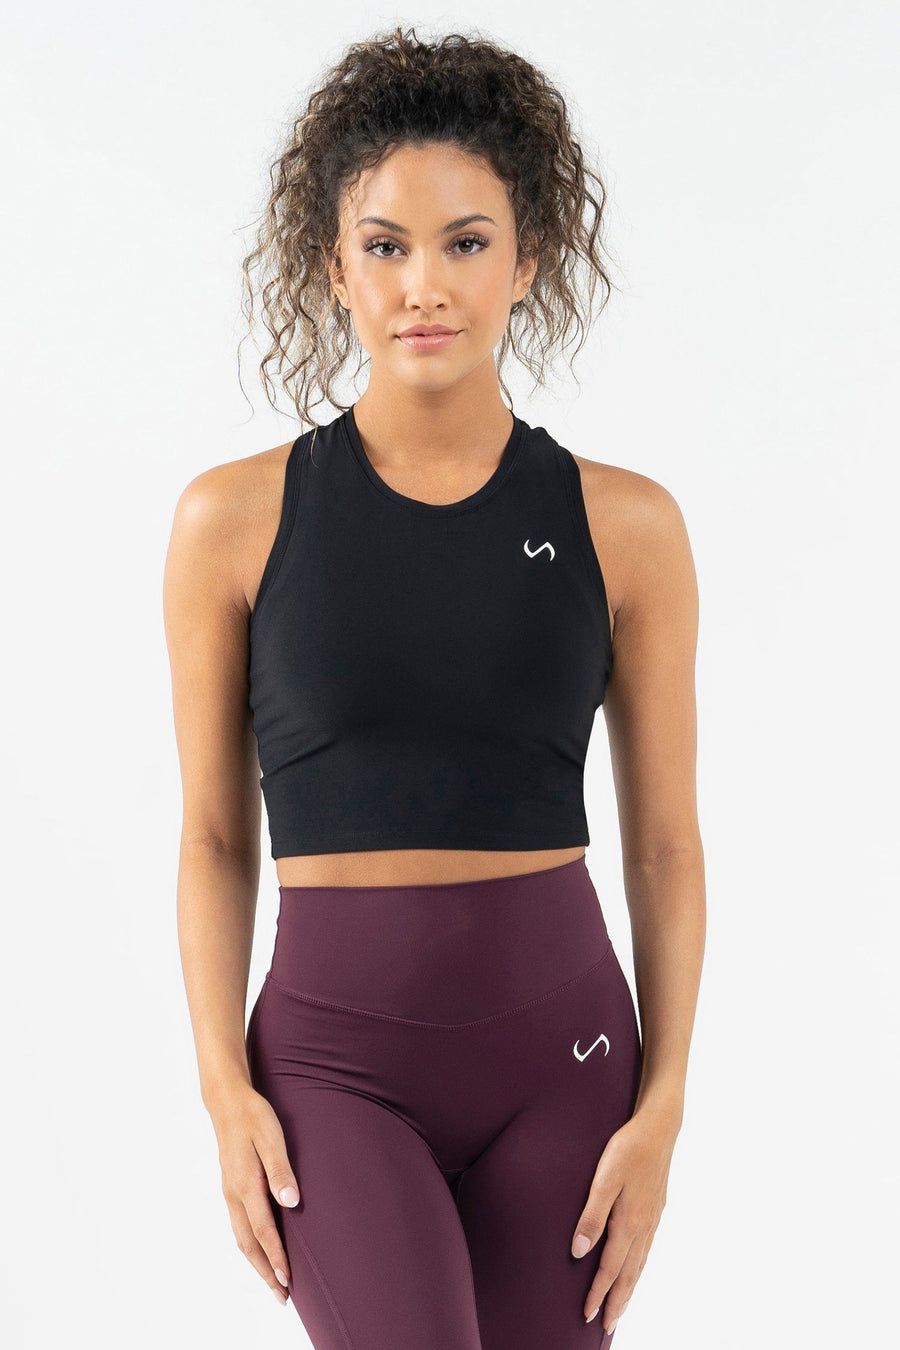 Women's Loose Yoga Top, Best Yoga, Sports, Workout, Running